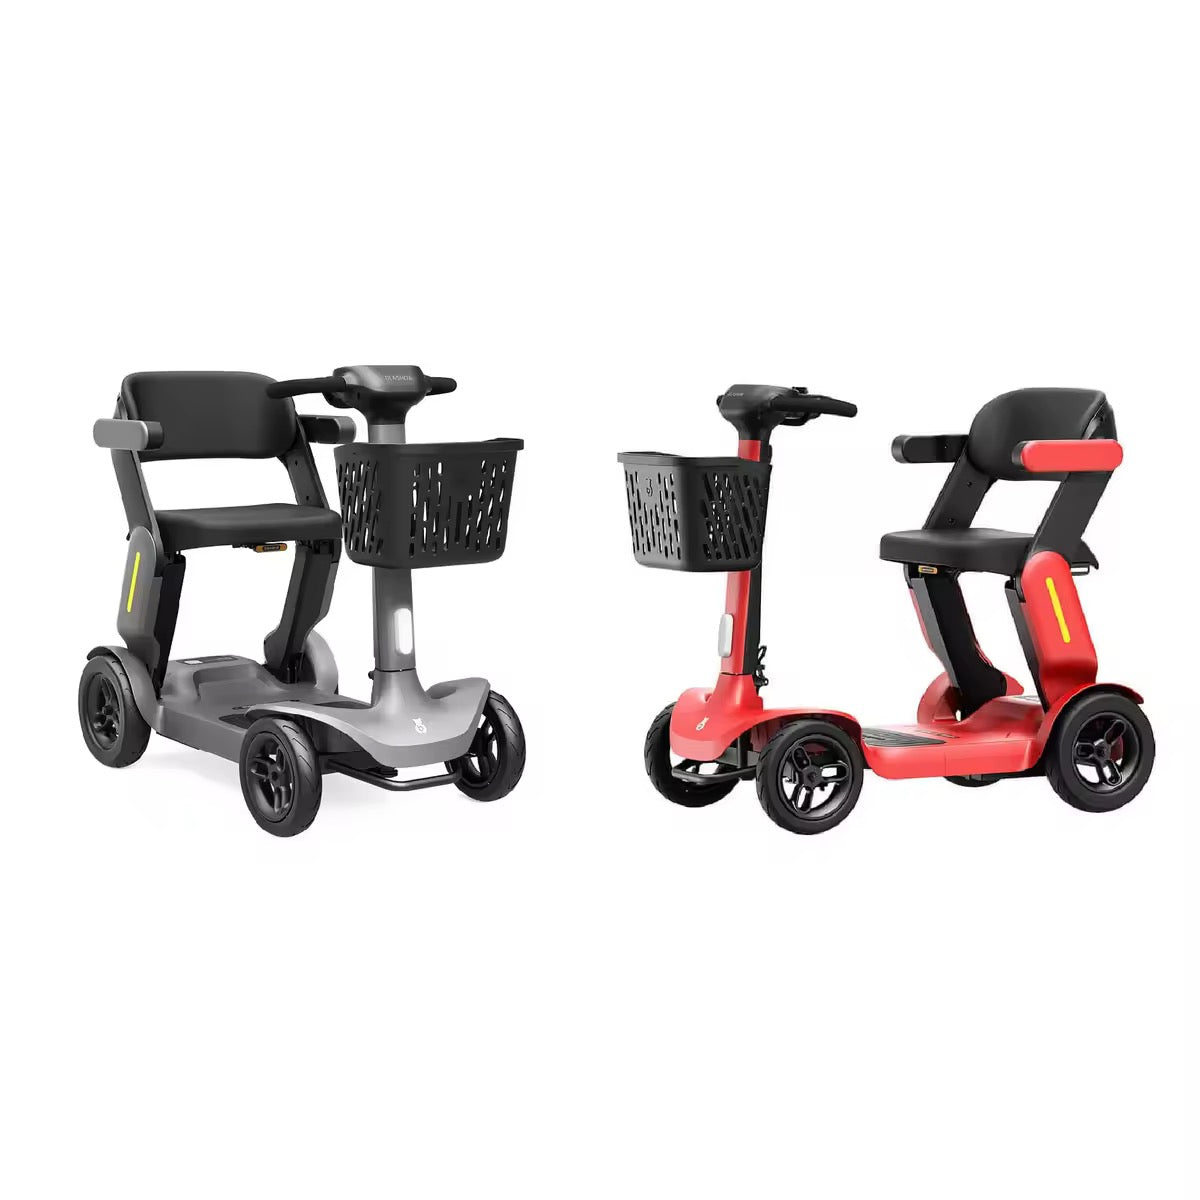 A Pair of Glashow Mobility Scooter S3